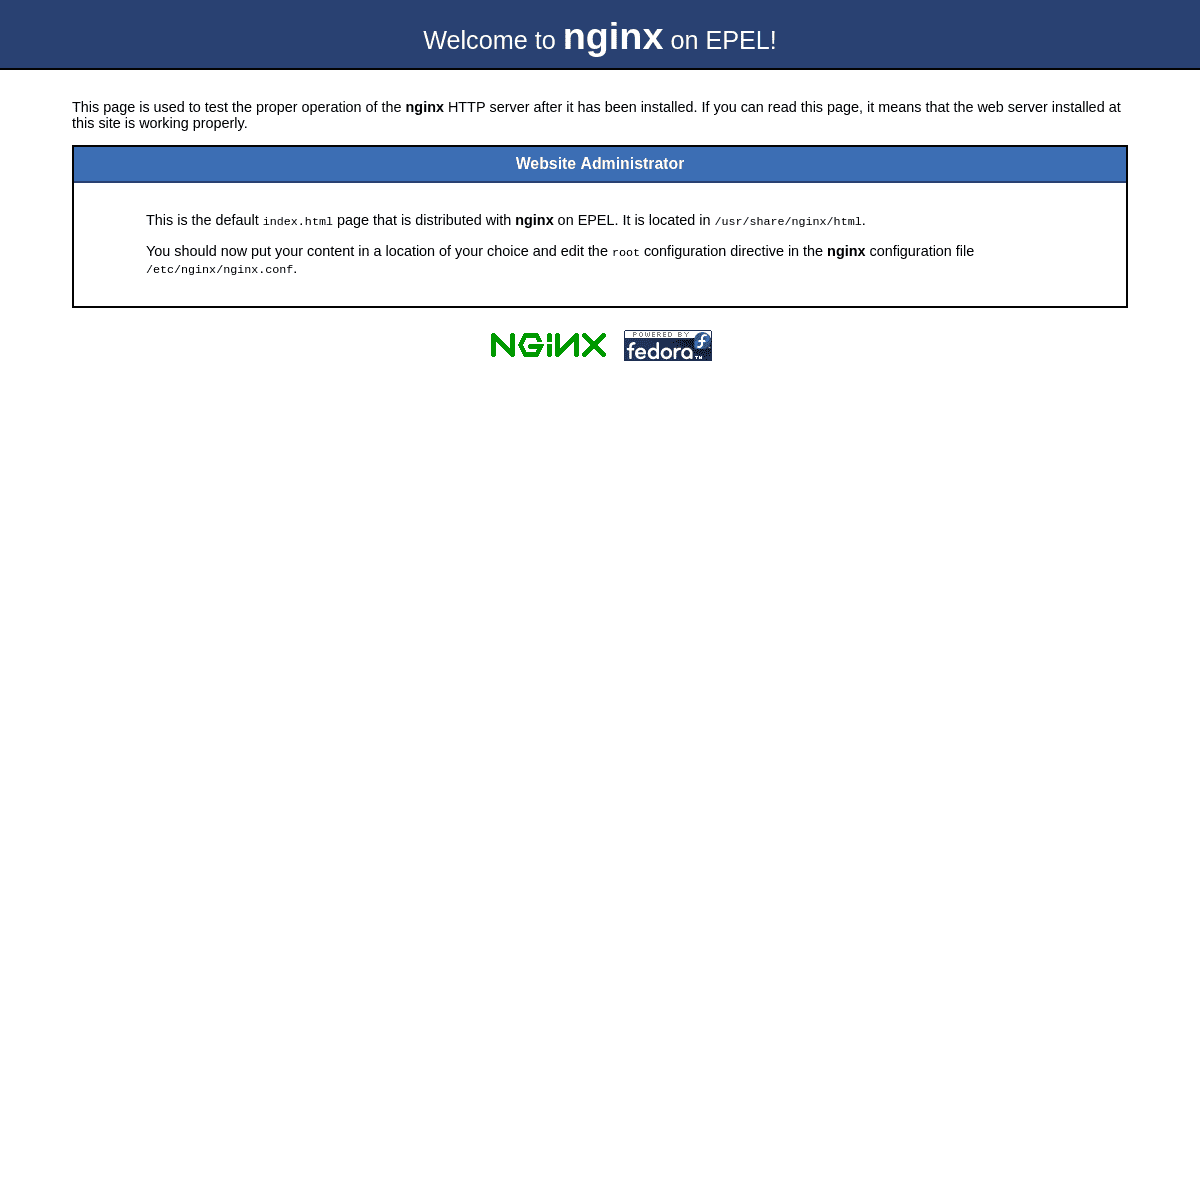 Test Page for the Nginx HTTP Server on EPEL